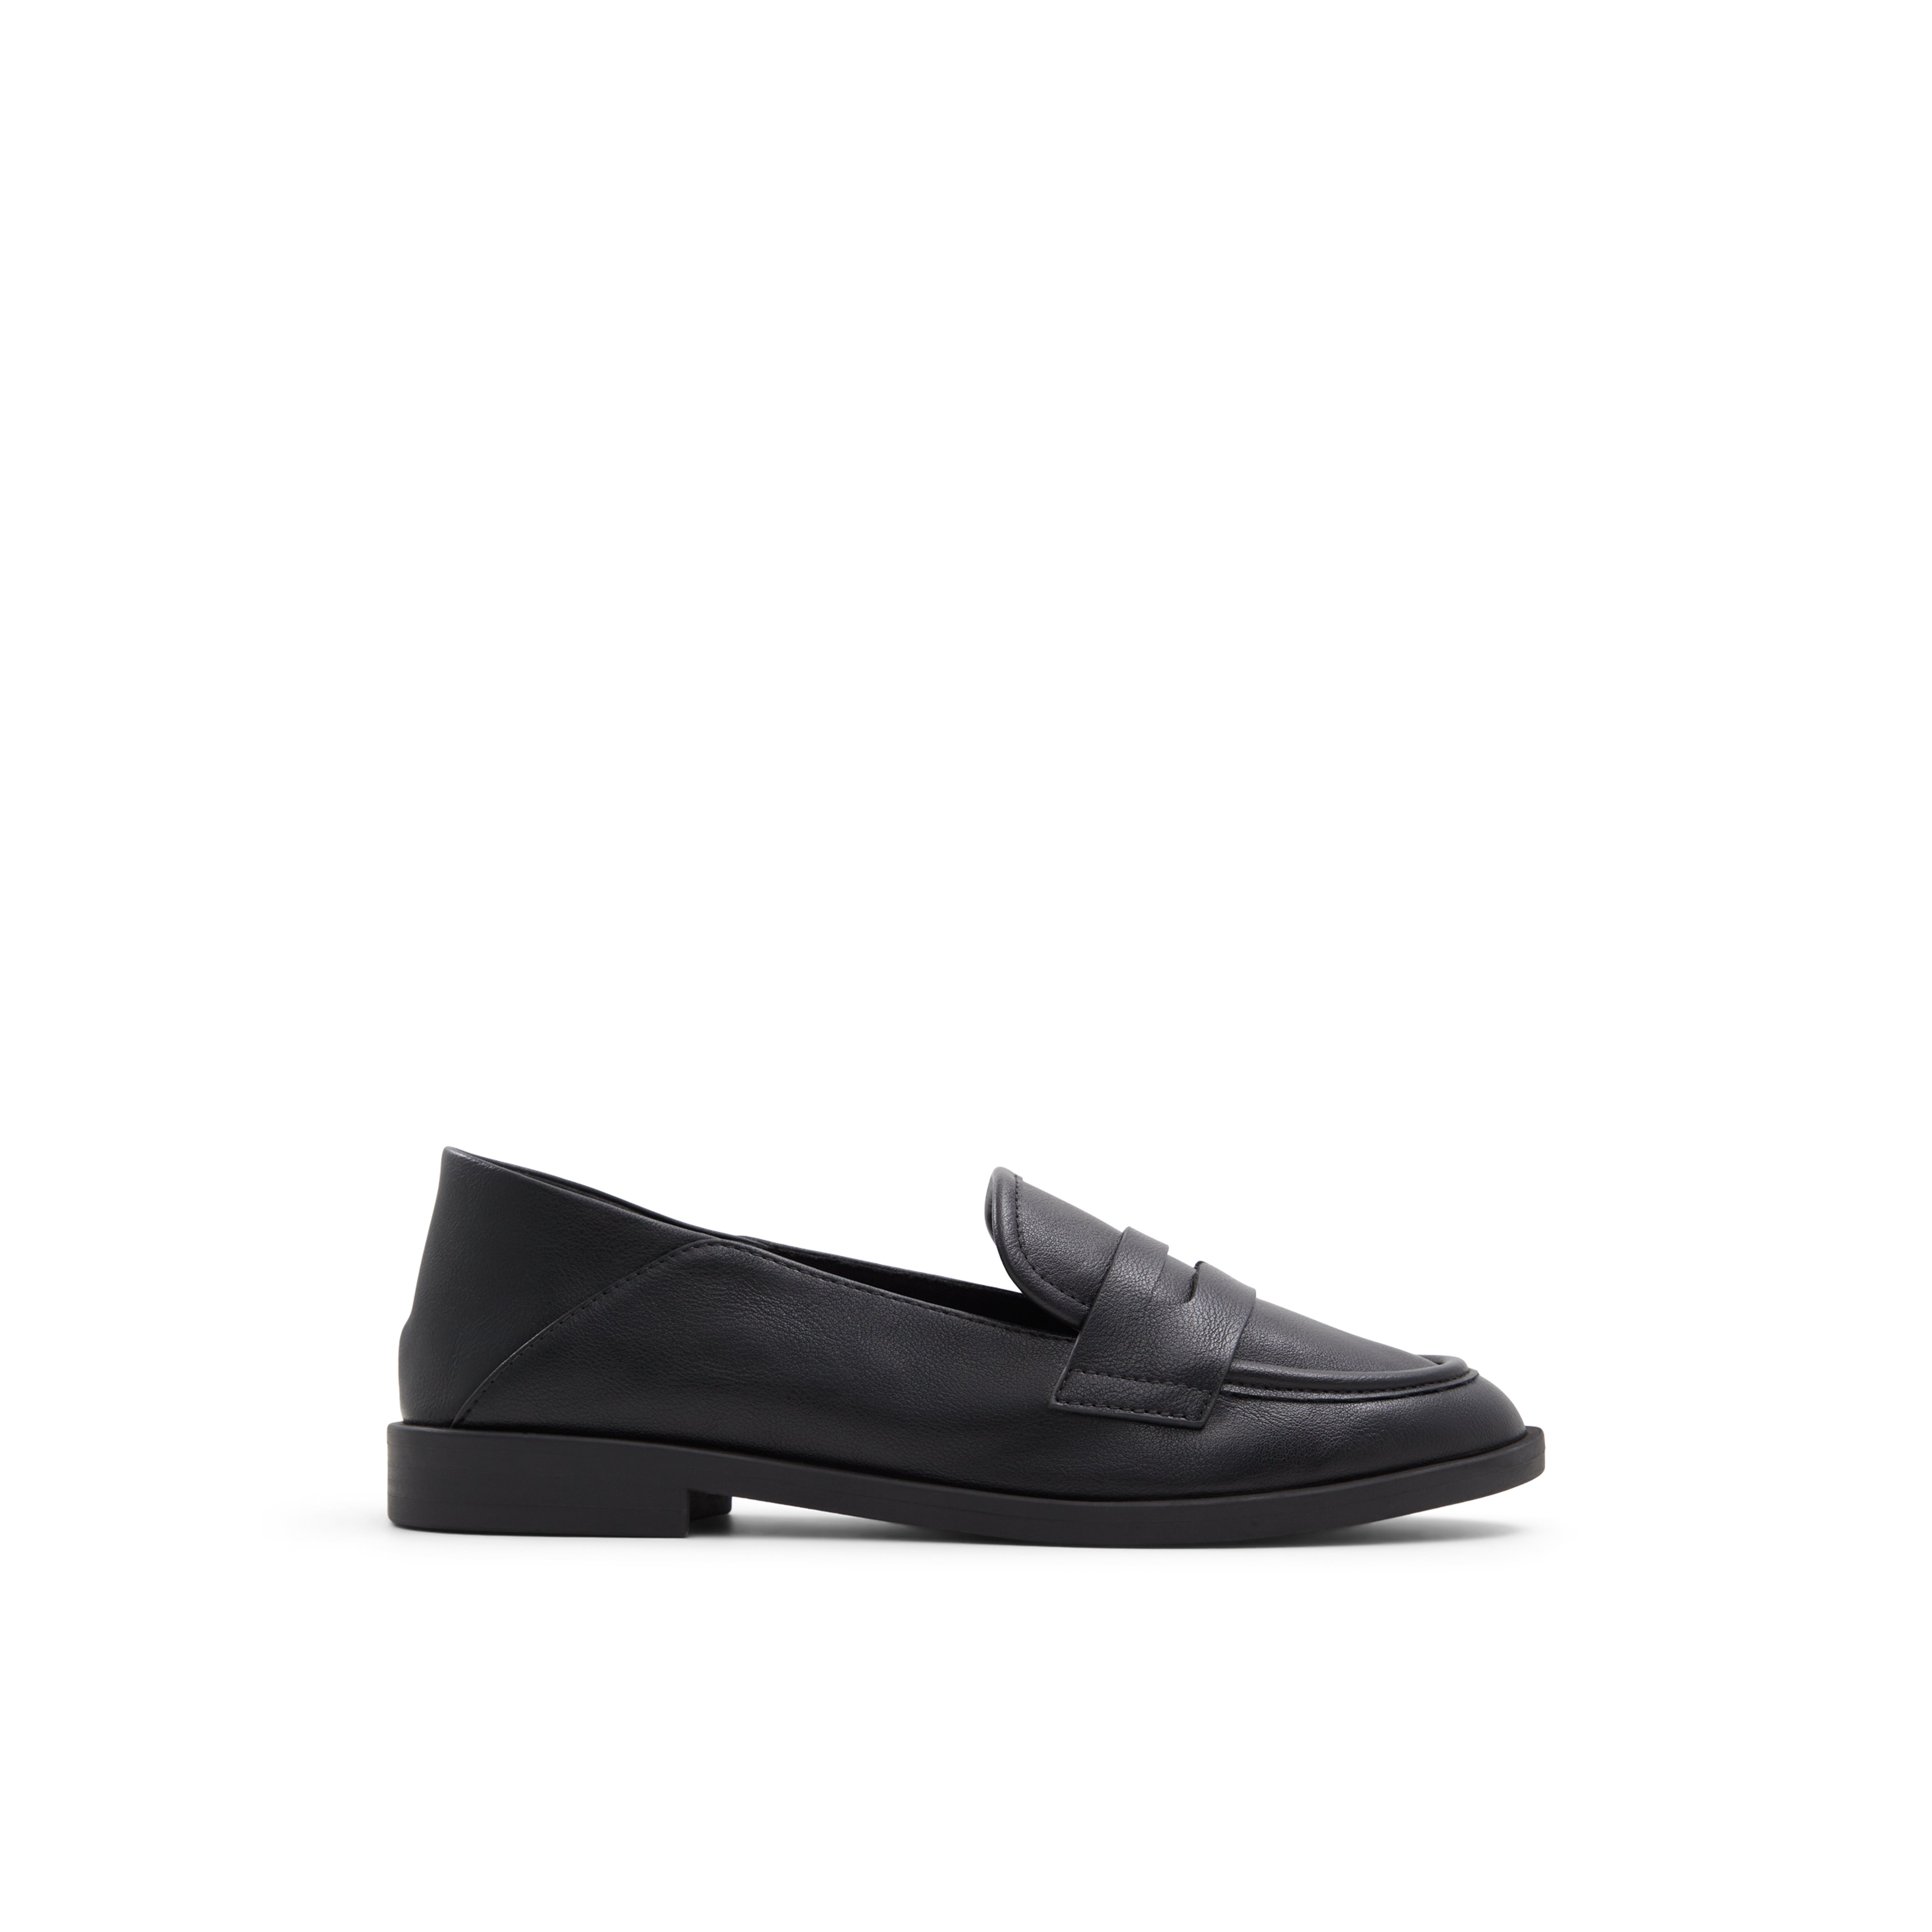 Quiinn Loafers - Flat shoes